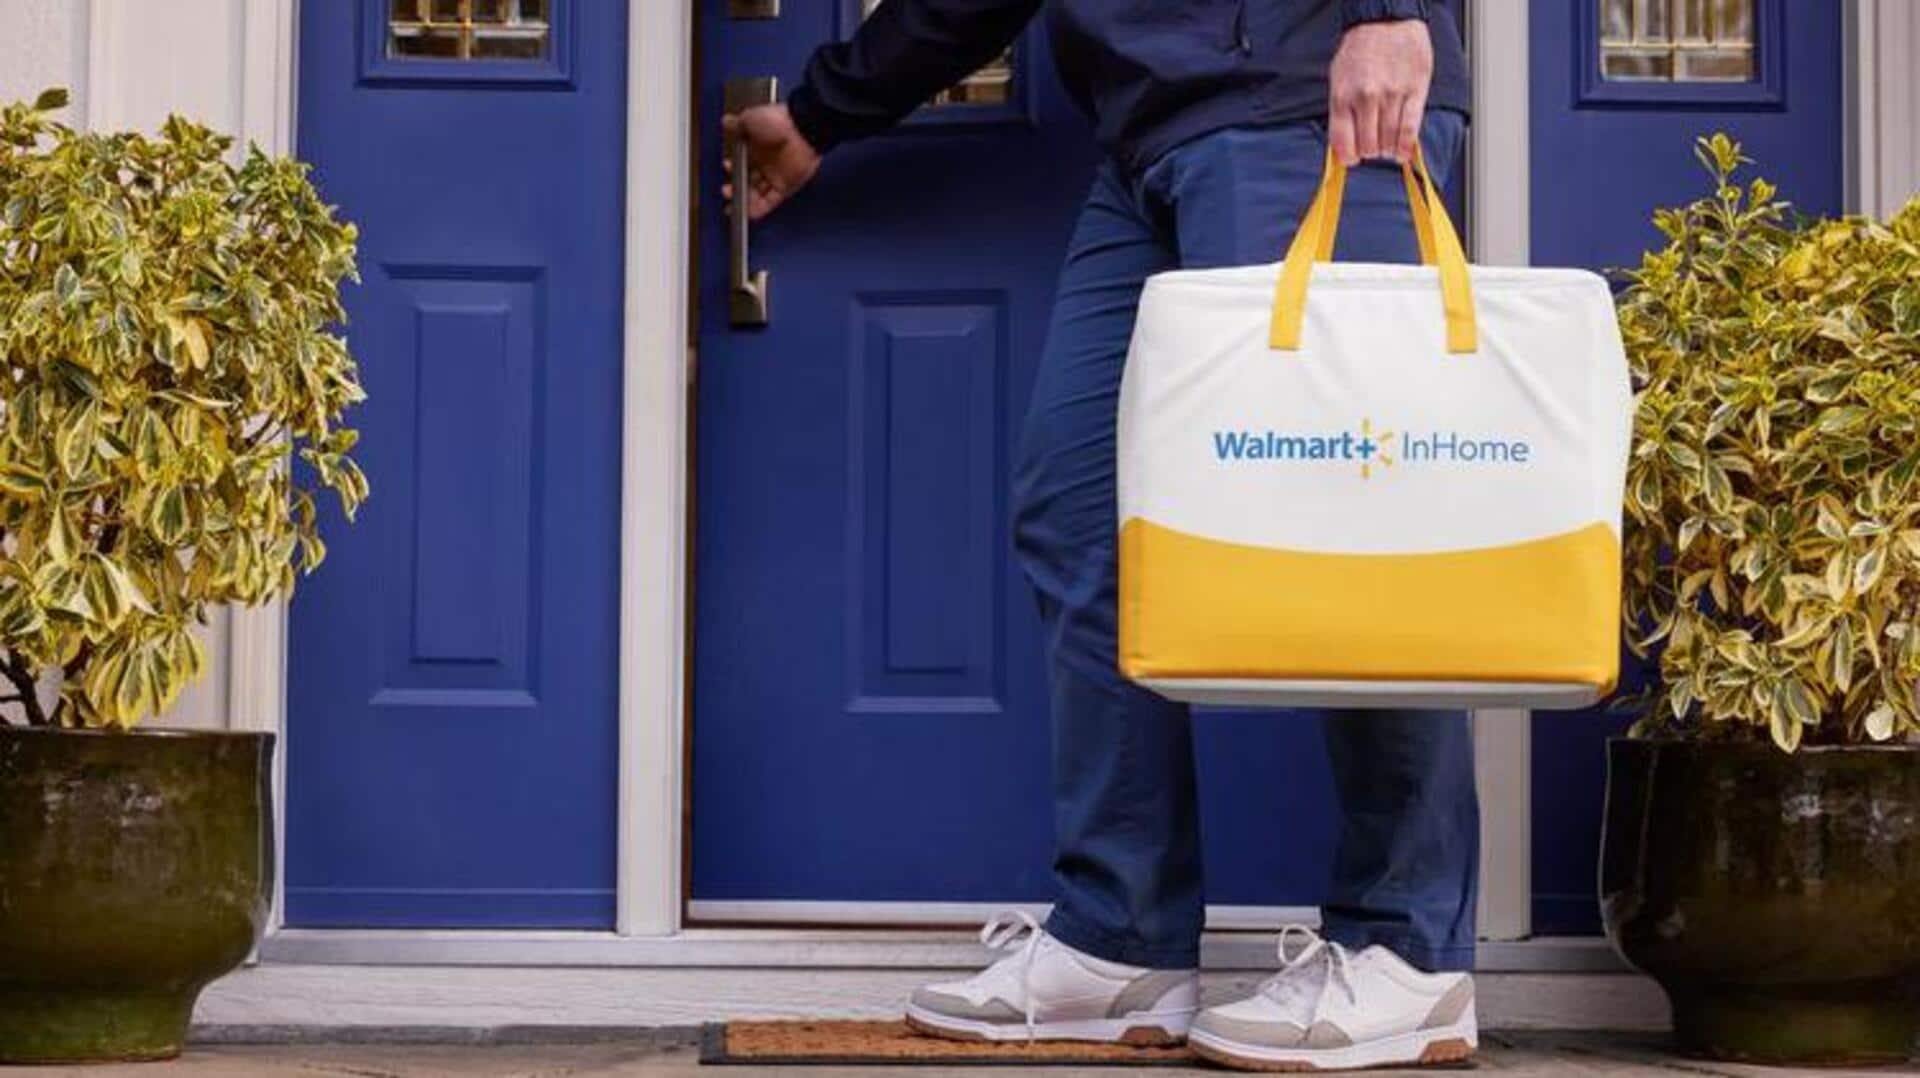 Walmart's new AI offering can do your shopping for you